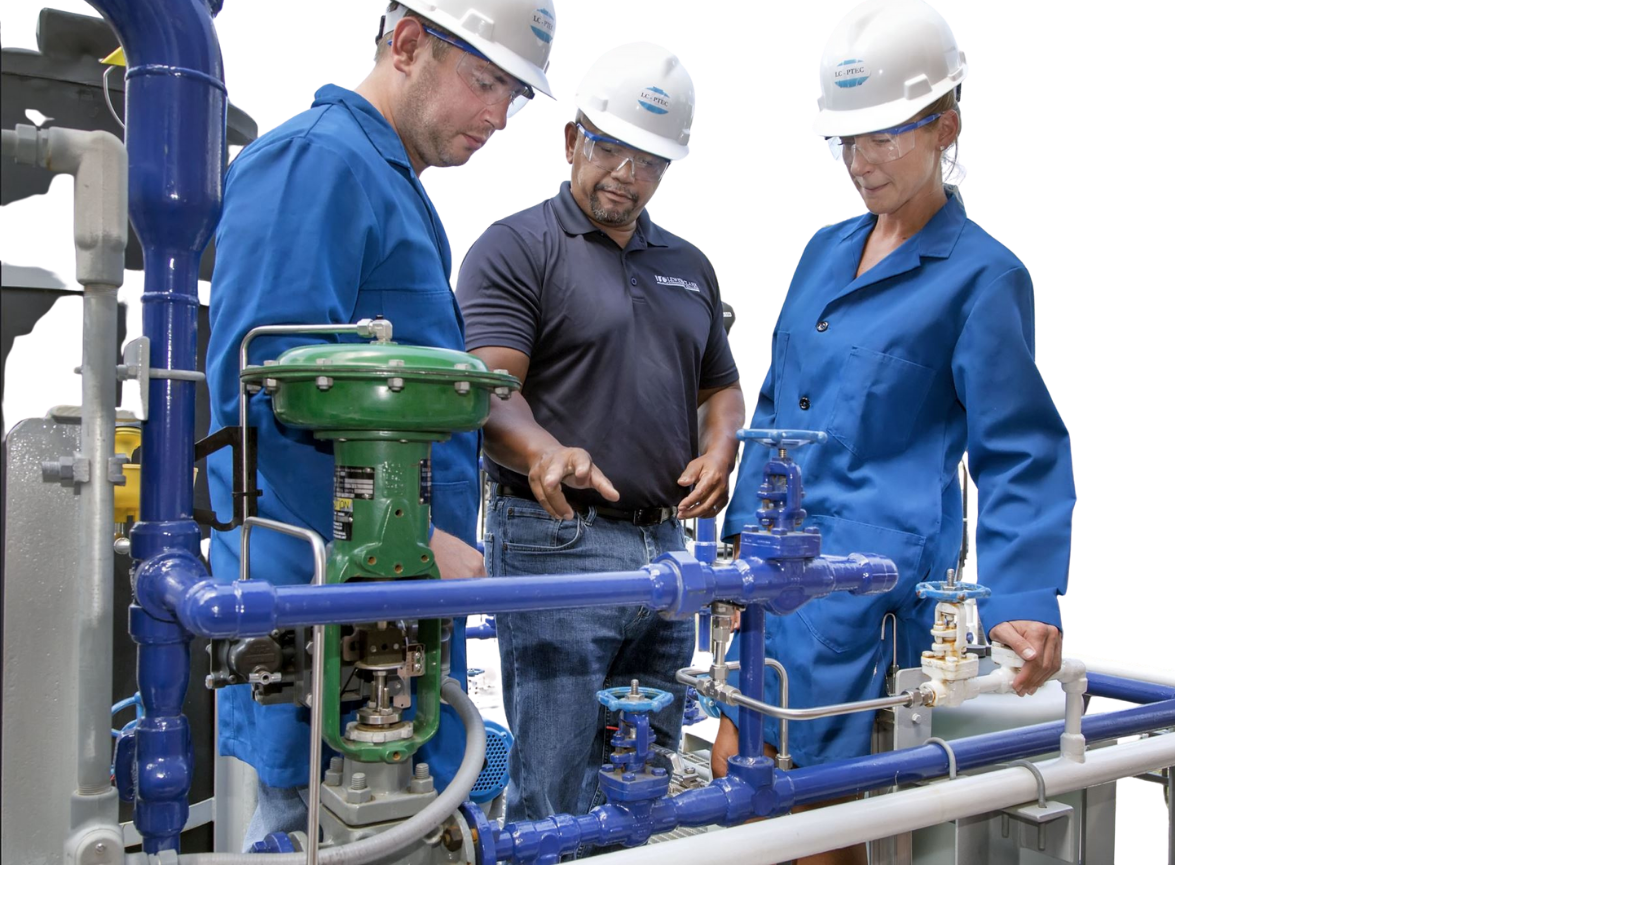 Learn how process equipment works with fully functional, life size HOT units (hands on training units).